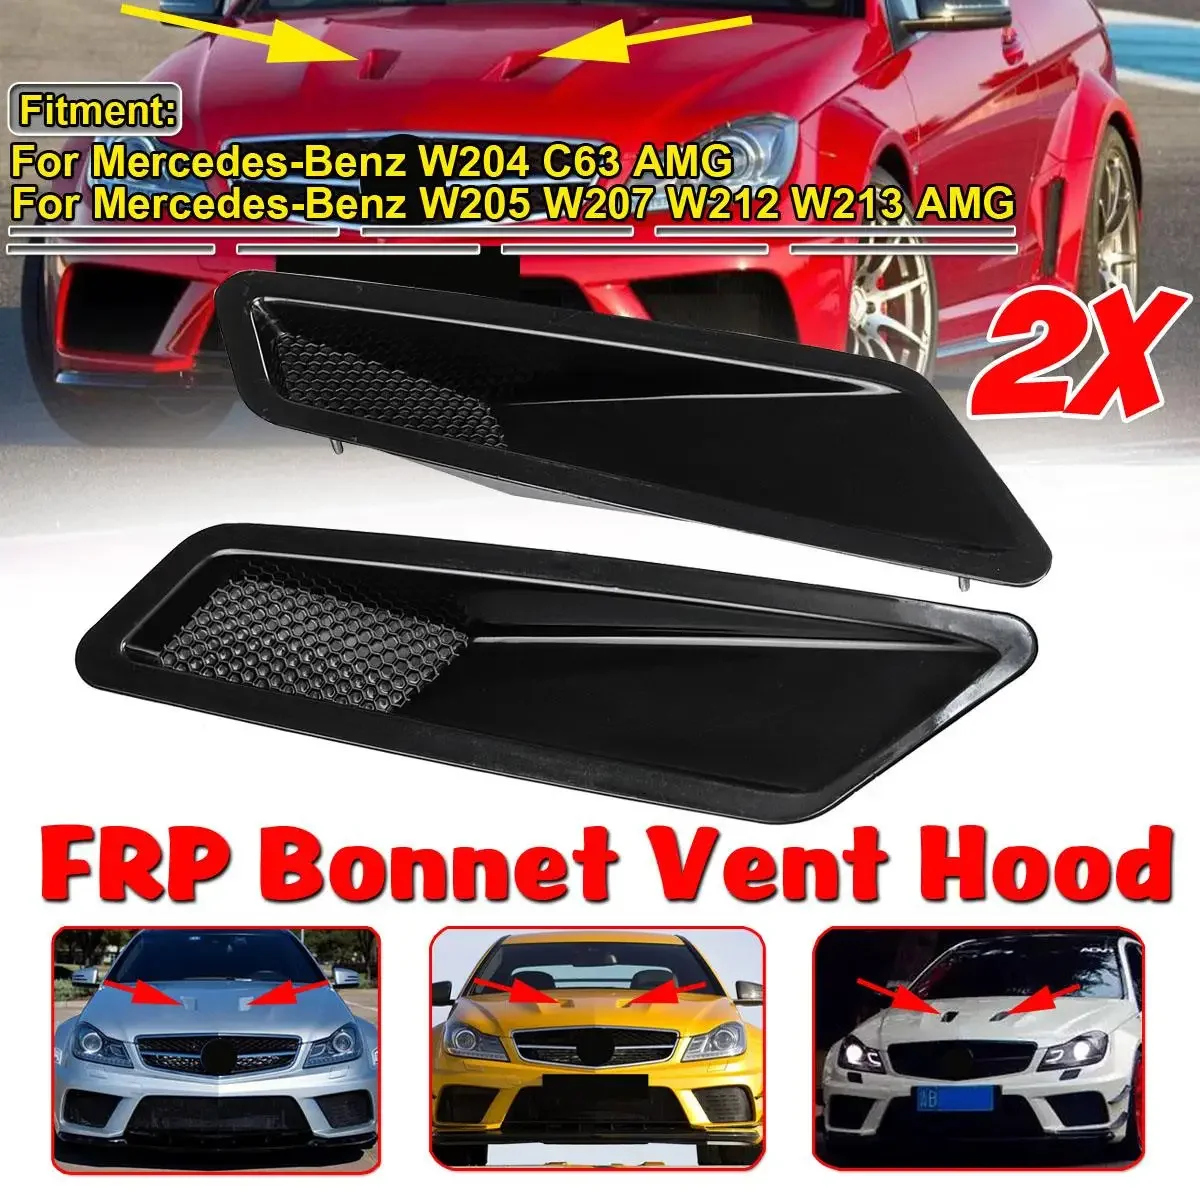 

2x Car Air Hood Vent Air Intake Scoop Bonnet Louvers For Mercedes For Benz W204 C63 W205 W207 W212 W213 For AMG Sedan For Coupe